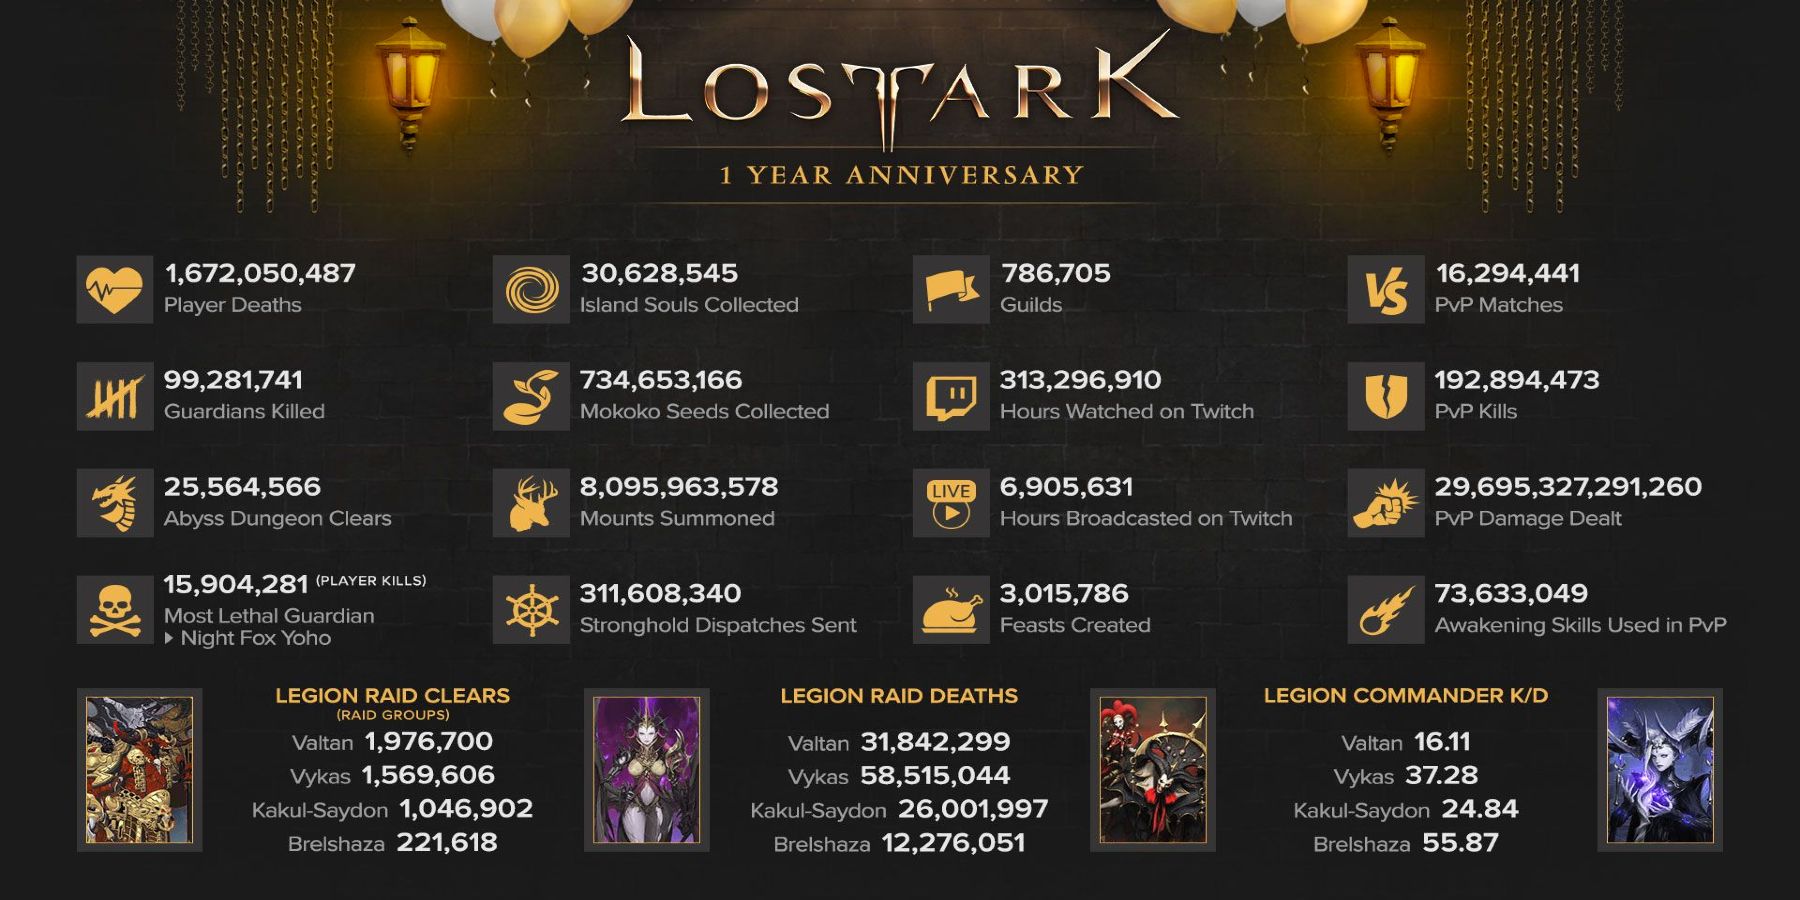 lost-ark-first-year-anniversary-infographic-1